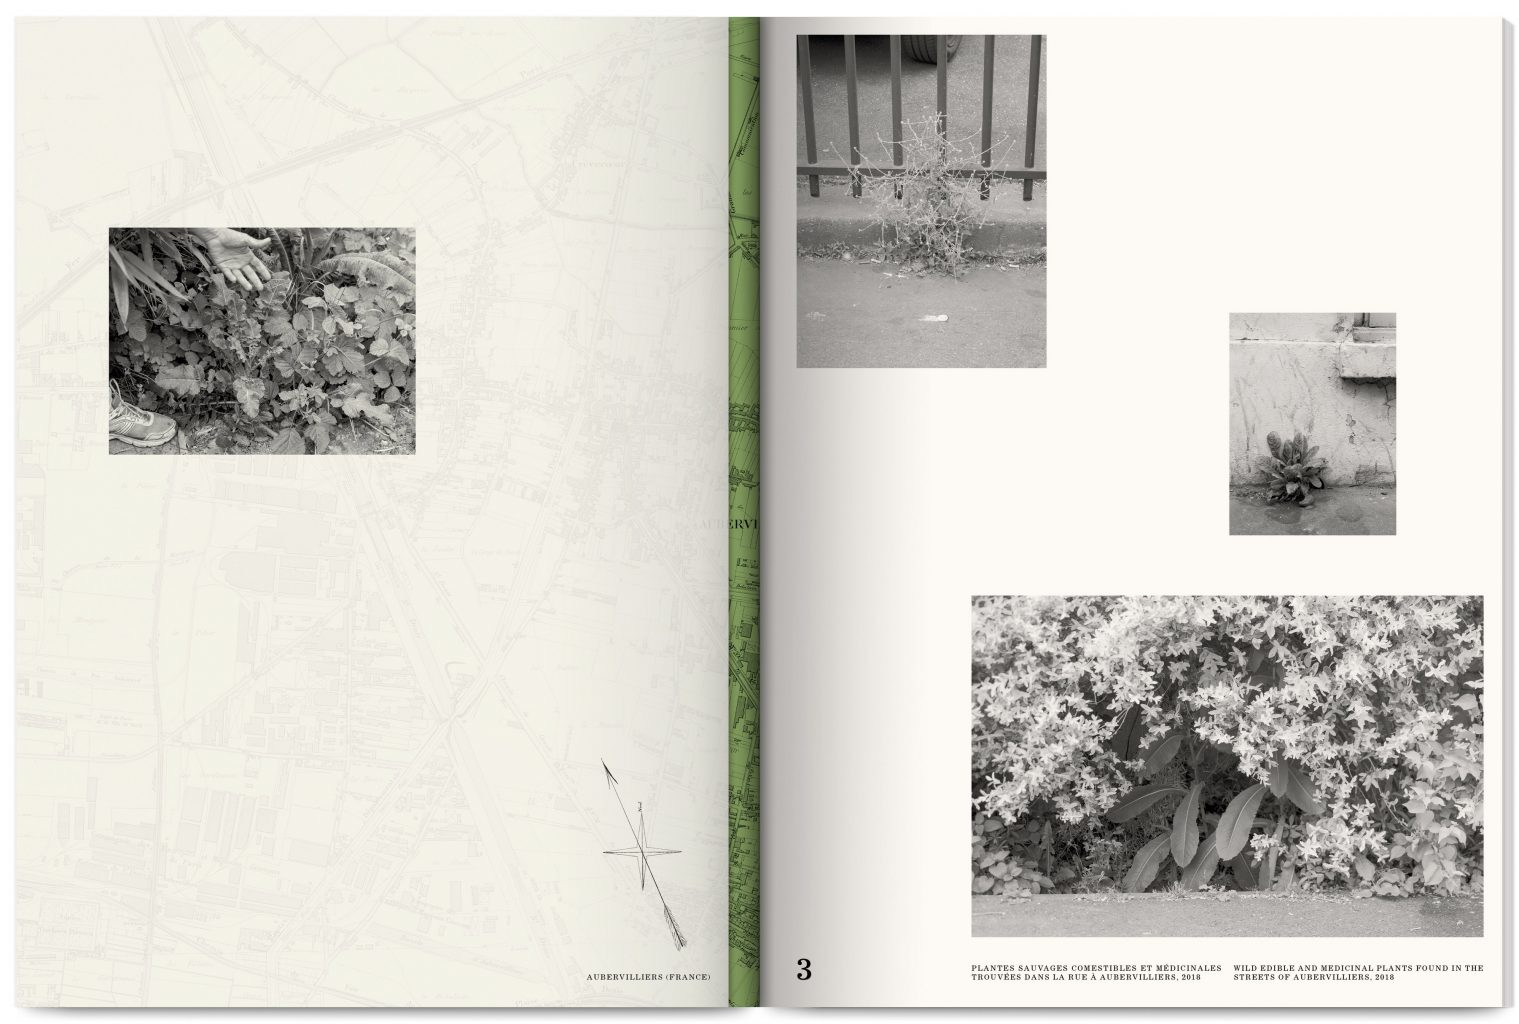 Affinités des sols – Soil Affinities, Uriel Orlow, edited by Uriel Orlow and Alexandra Baudelot, published by Shelter Press and Les Laboratoires d’Aubervilliers, designed by In the shade of a tree studio, founded by Sophie Demay and Maël Fournier Comte.